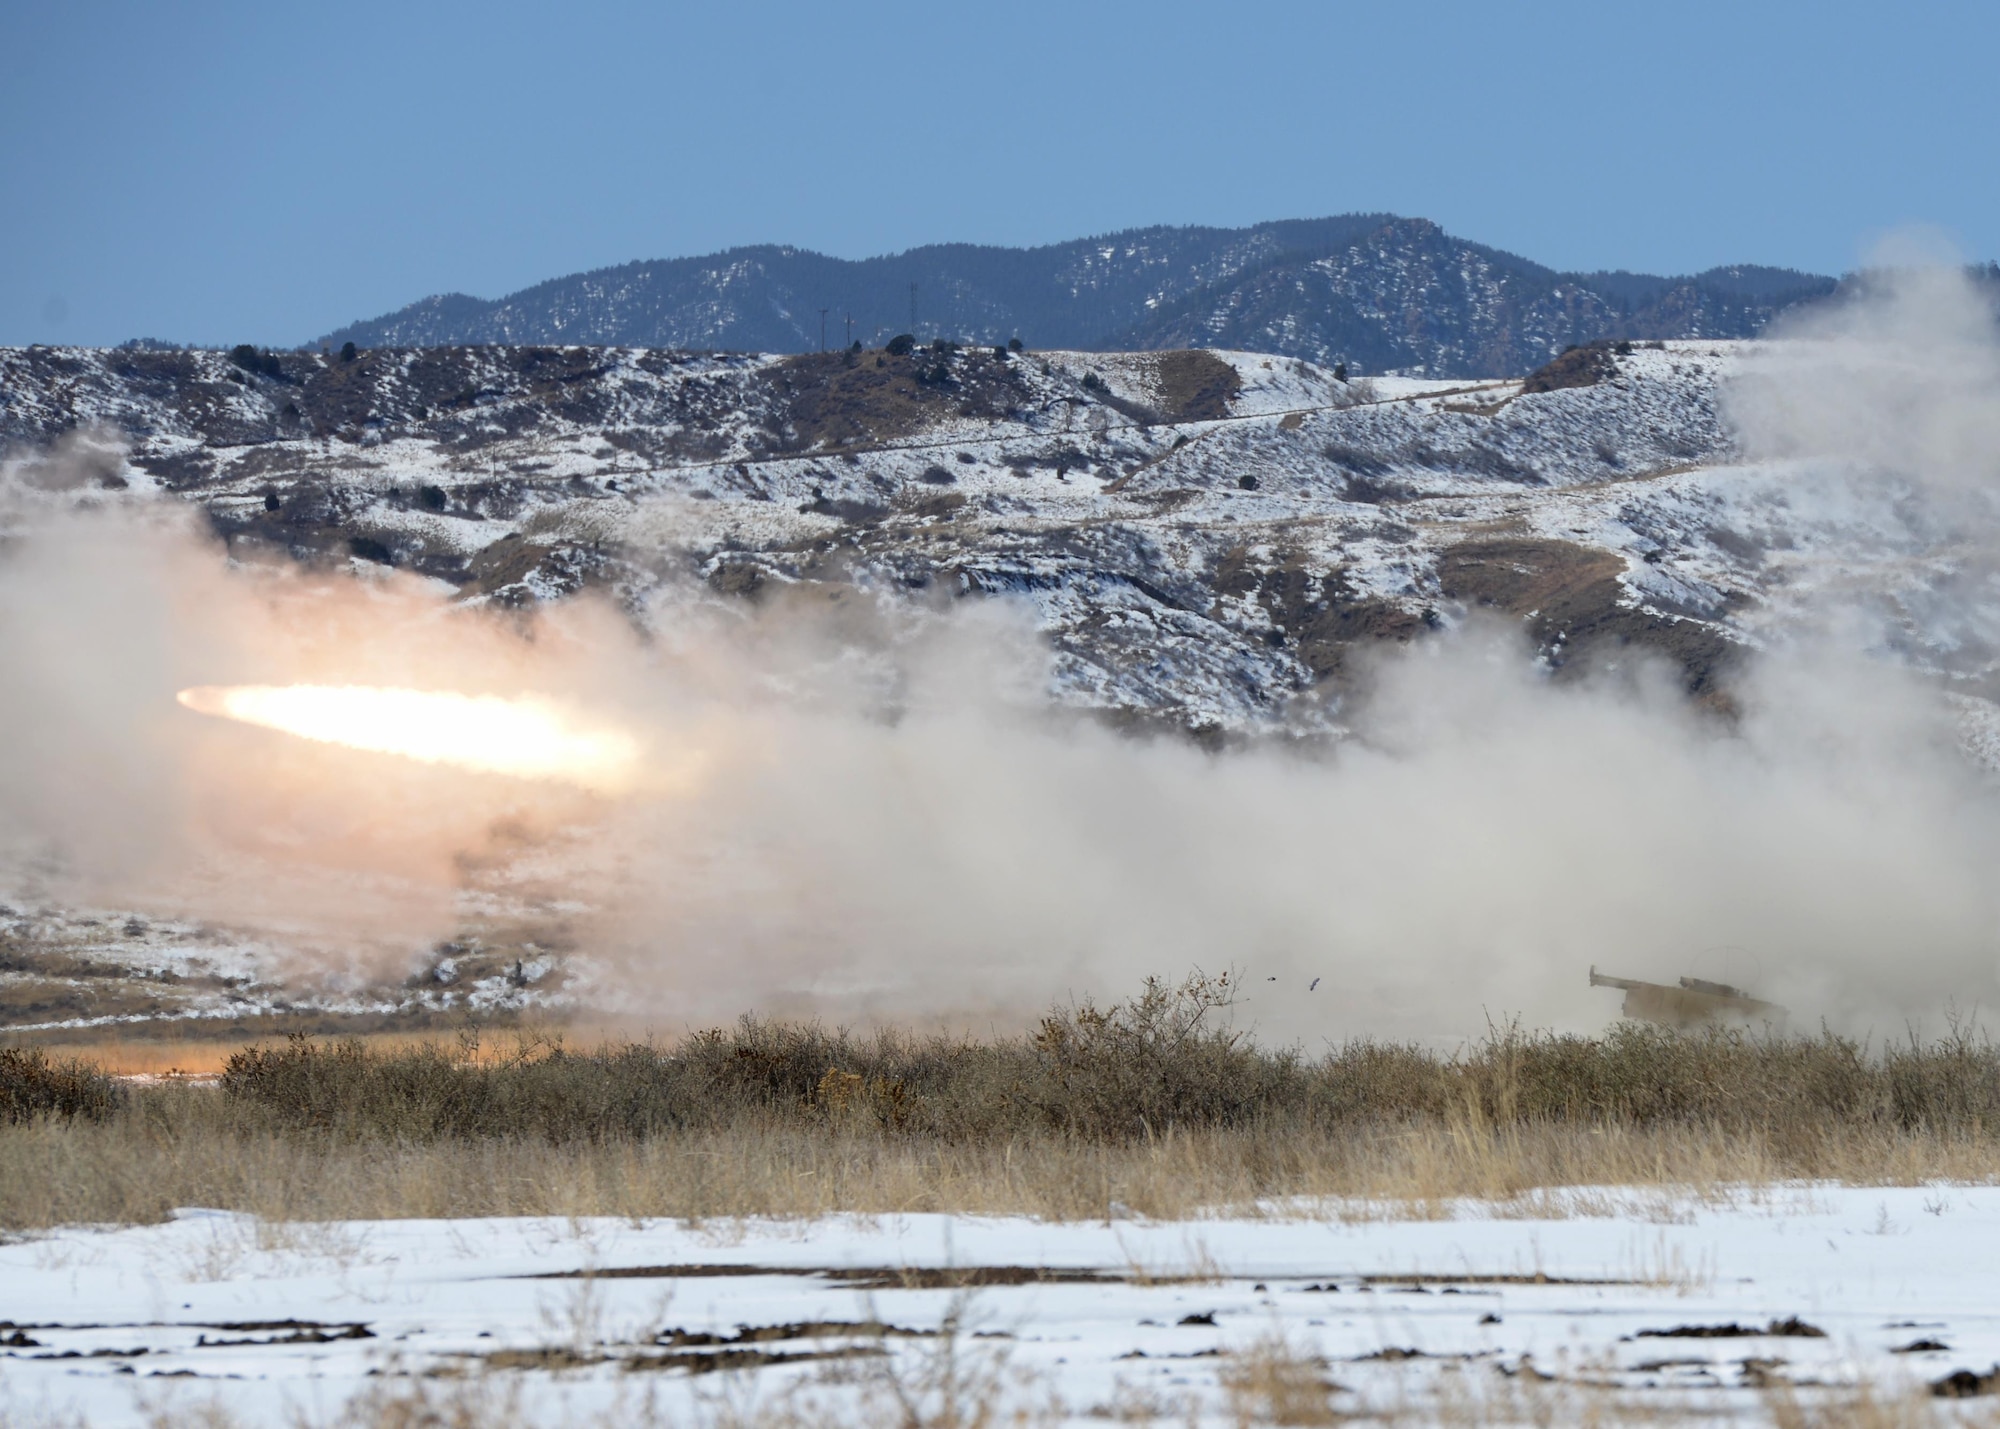 Soldiers fire a rocket from a M142 High Mobility Artillery Rocket System (HIMARS) March 6, 2015, at Fort Carson, Colo. There were 12 rockets fired in total during the joint exercise training. The training helped Airmen and Soldiers stay proficient in transporting, setting up and firing a HIMARS. The Soldiers were from the 1st Battalion, 14 Field Artillery Regiment, 214th Fires Brigade. (U.S. Air Force photo/Airman 1st Class Nathan Clark)